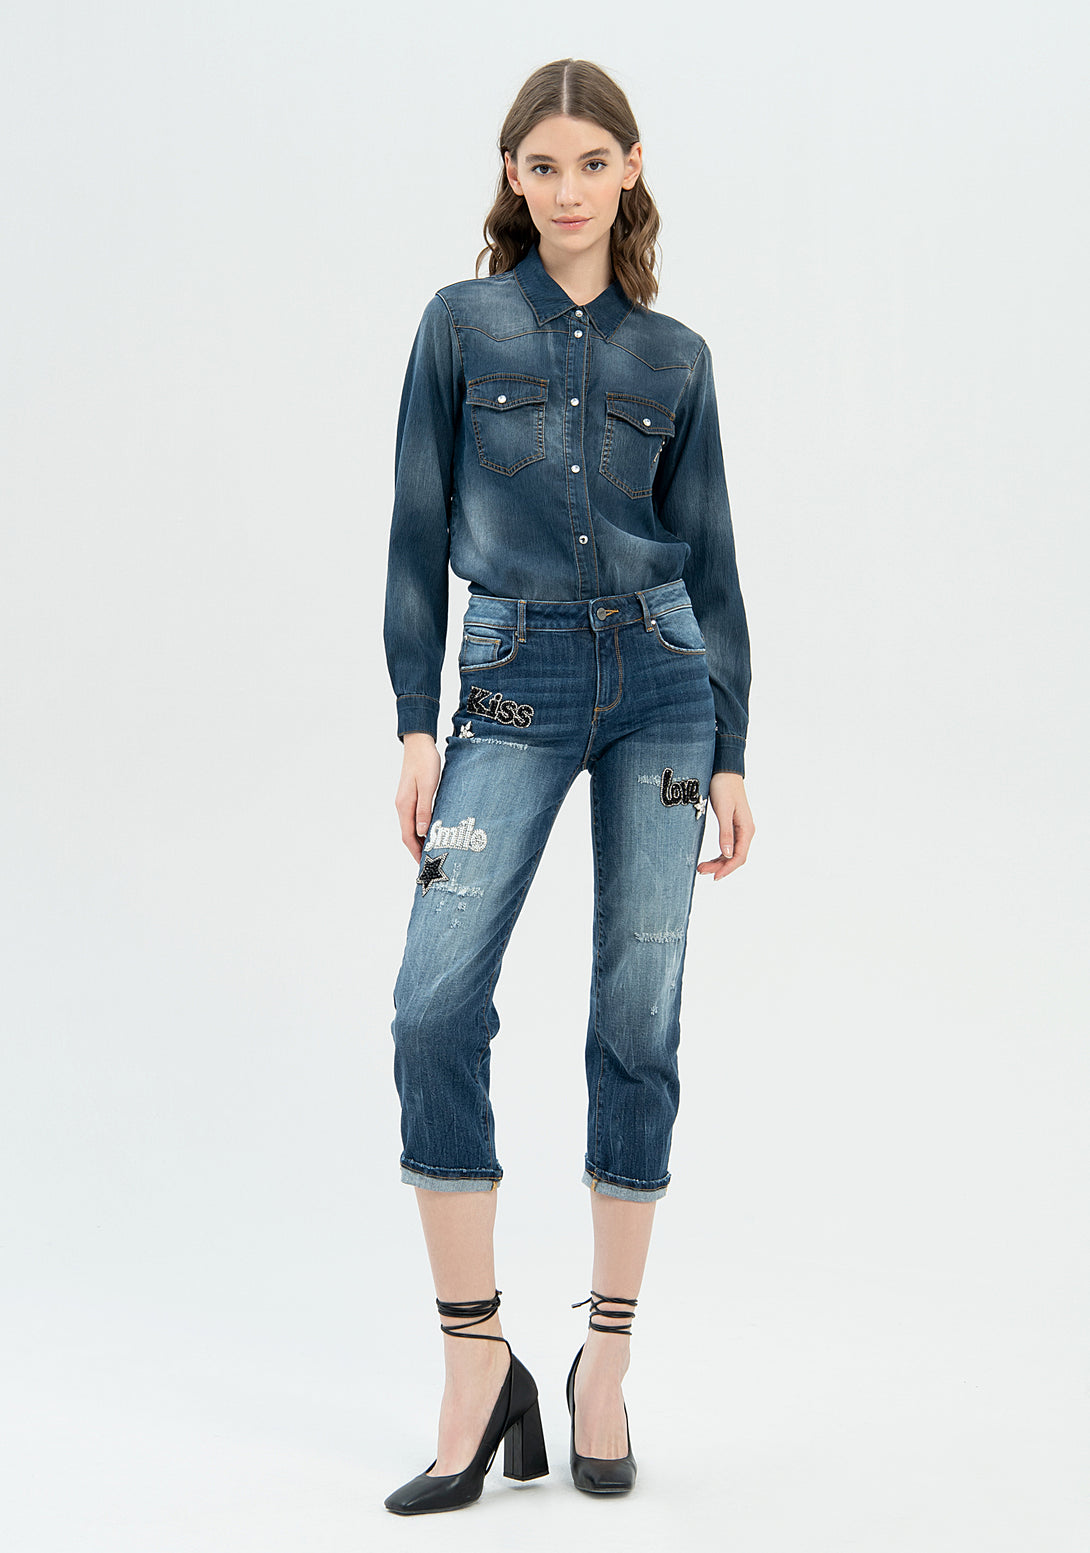 Jeans cropped effetto shape up in denim nero con lavaggio strong-FRACOMINA-FP22WV8031D420G5-430-JN-24